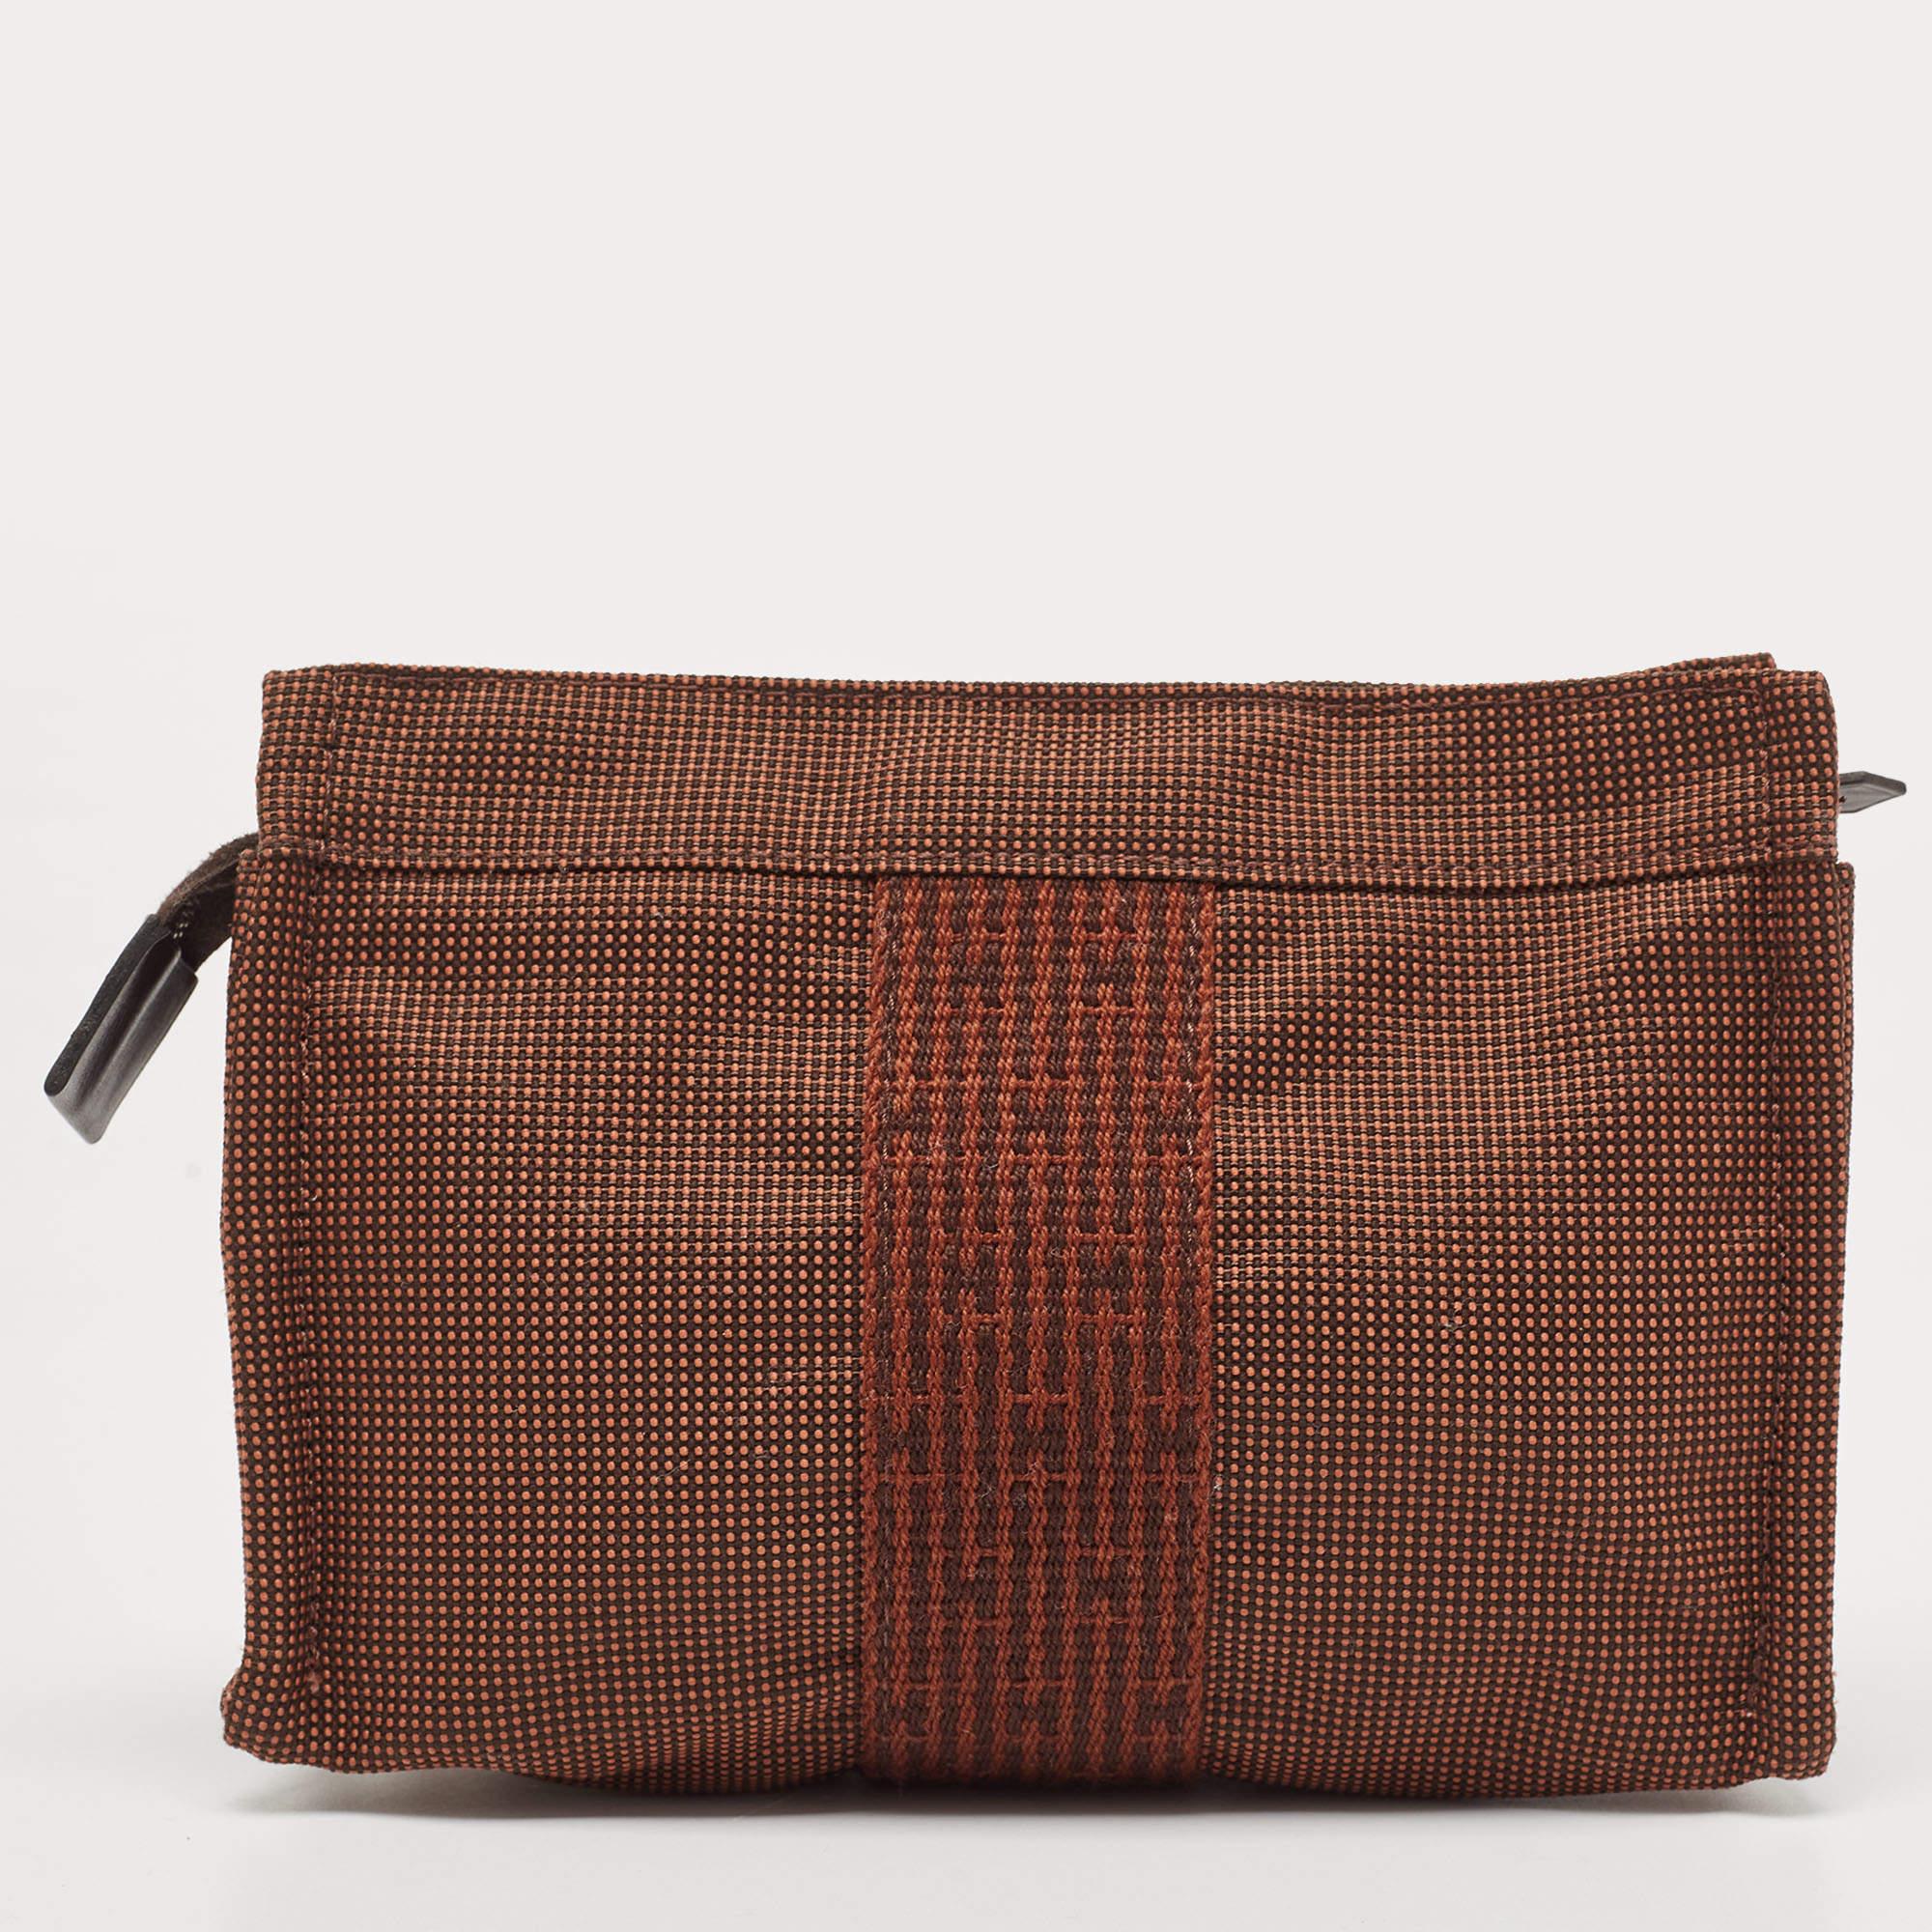 This pouch is such a stylish fashion-meets-function accessory you'll love carrying it all the time. Crafted from quality materials, it can easily fit your essentials effortlessly.

